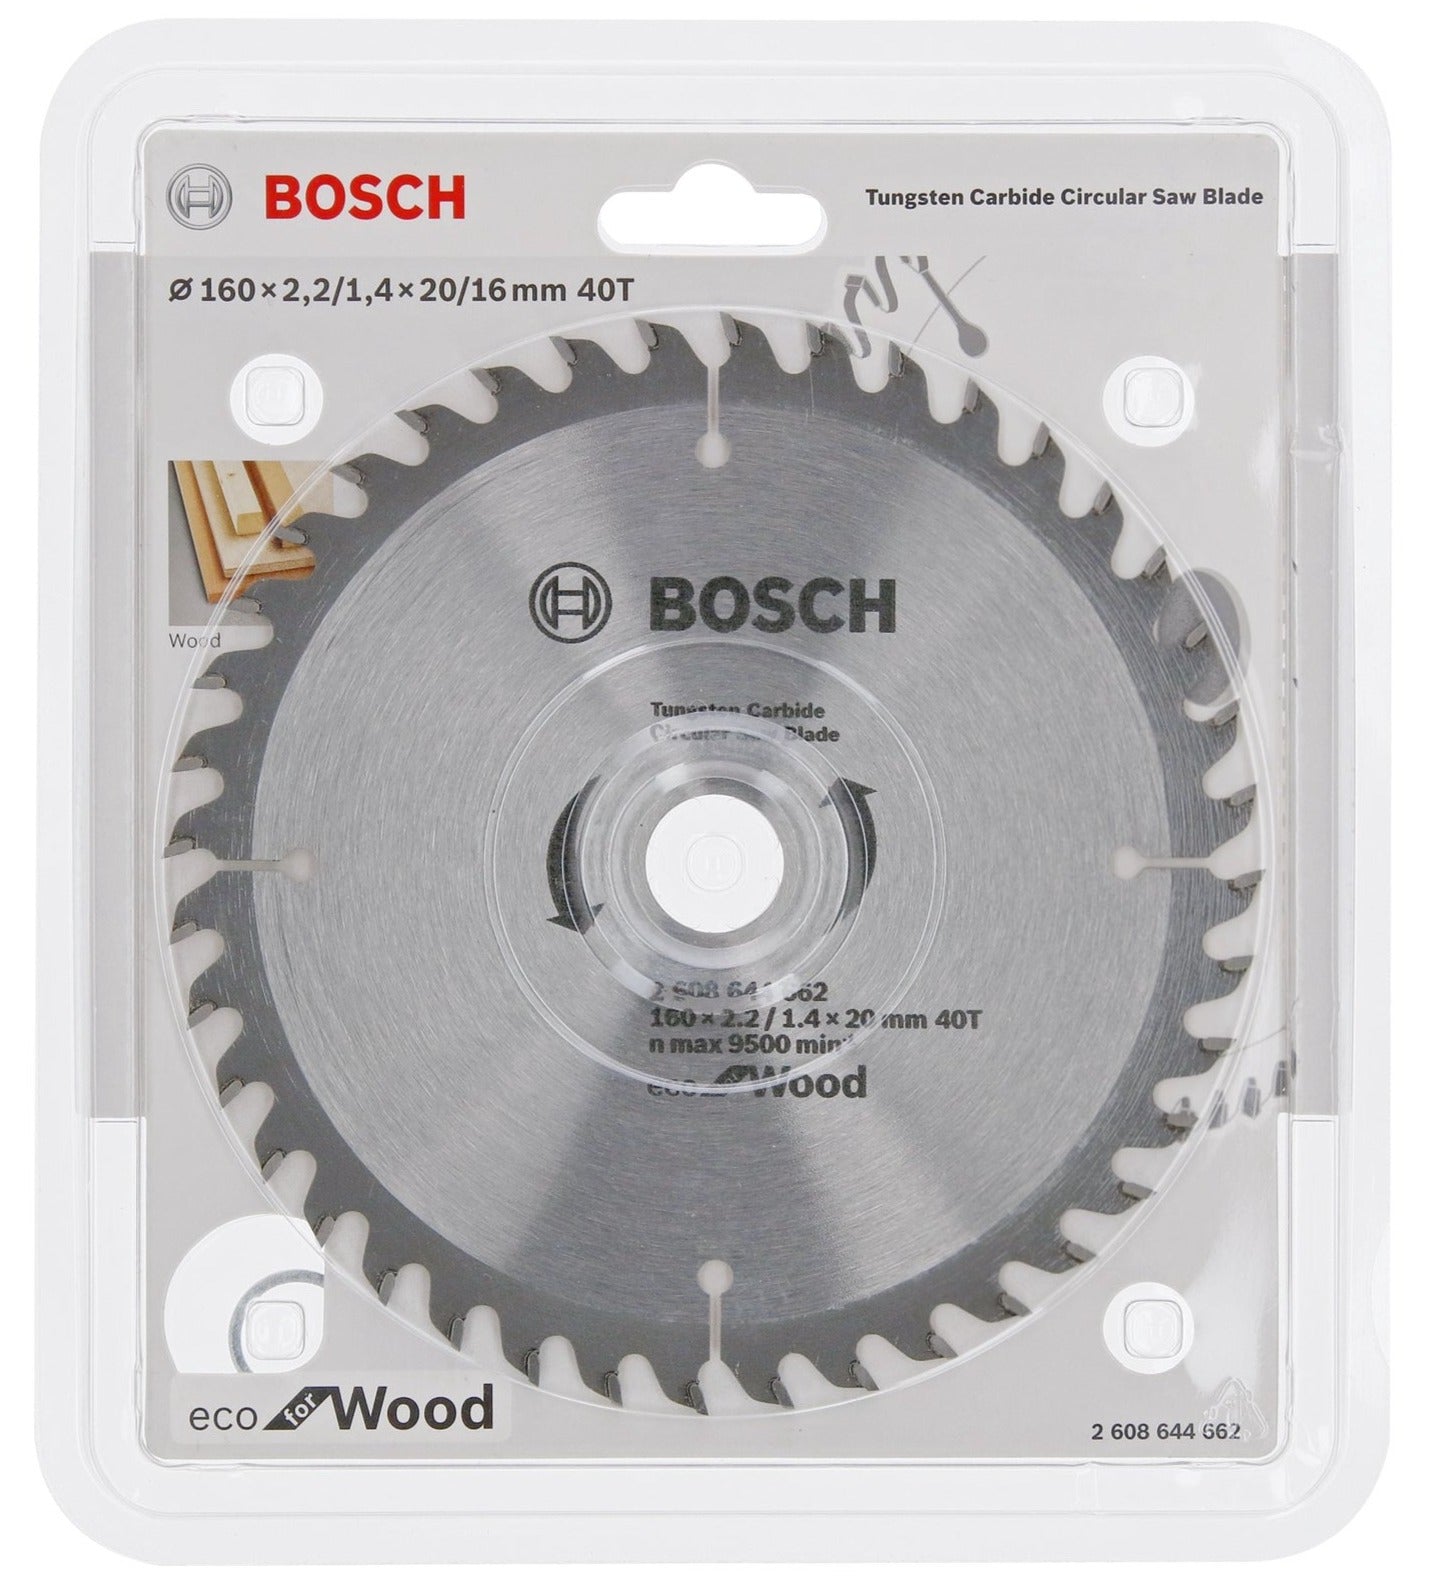 Bosch ECO line Circular Saw Blade for Wood 160 x 20, 40 2608644662 Power Tool Services